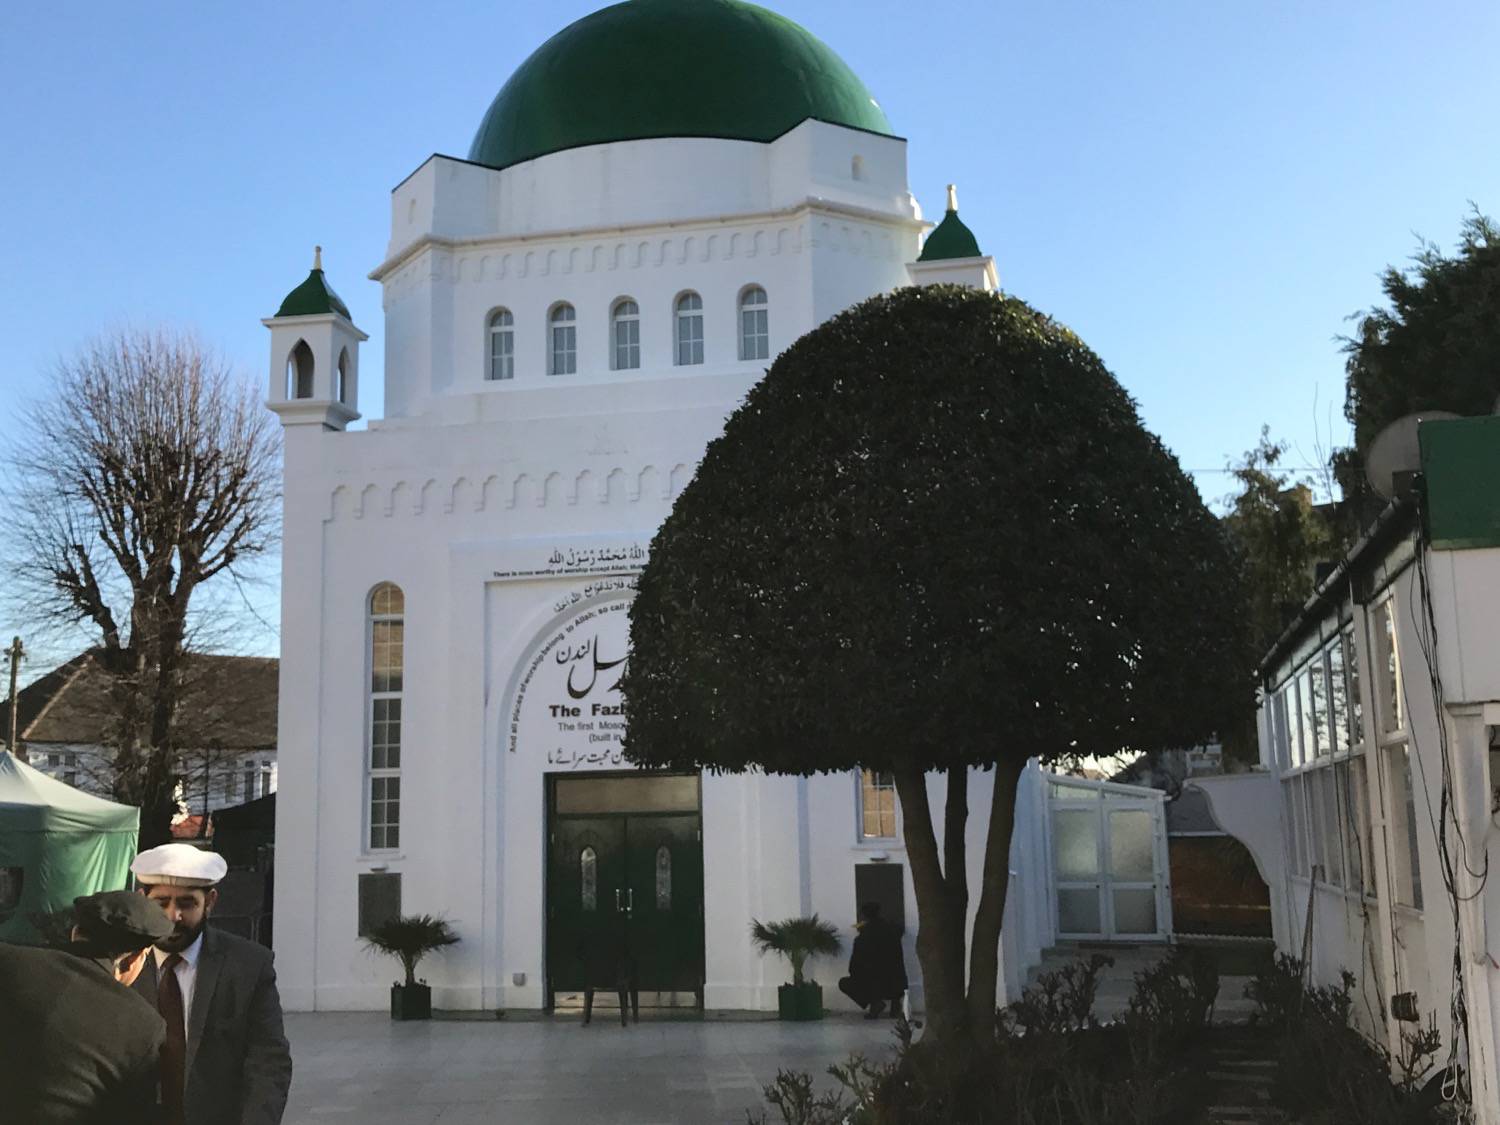 Fazl Mosque - View of the main entrance past ornamental trees